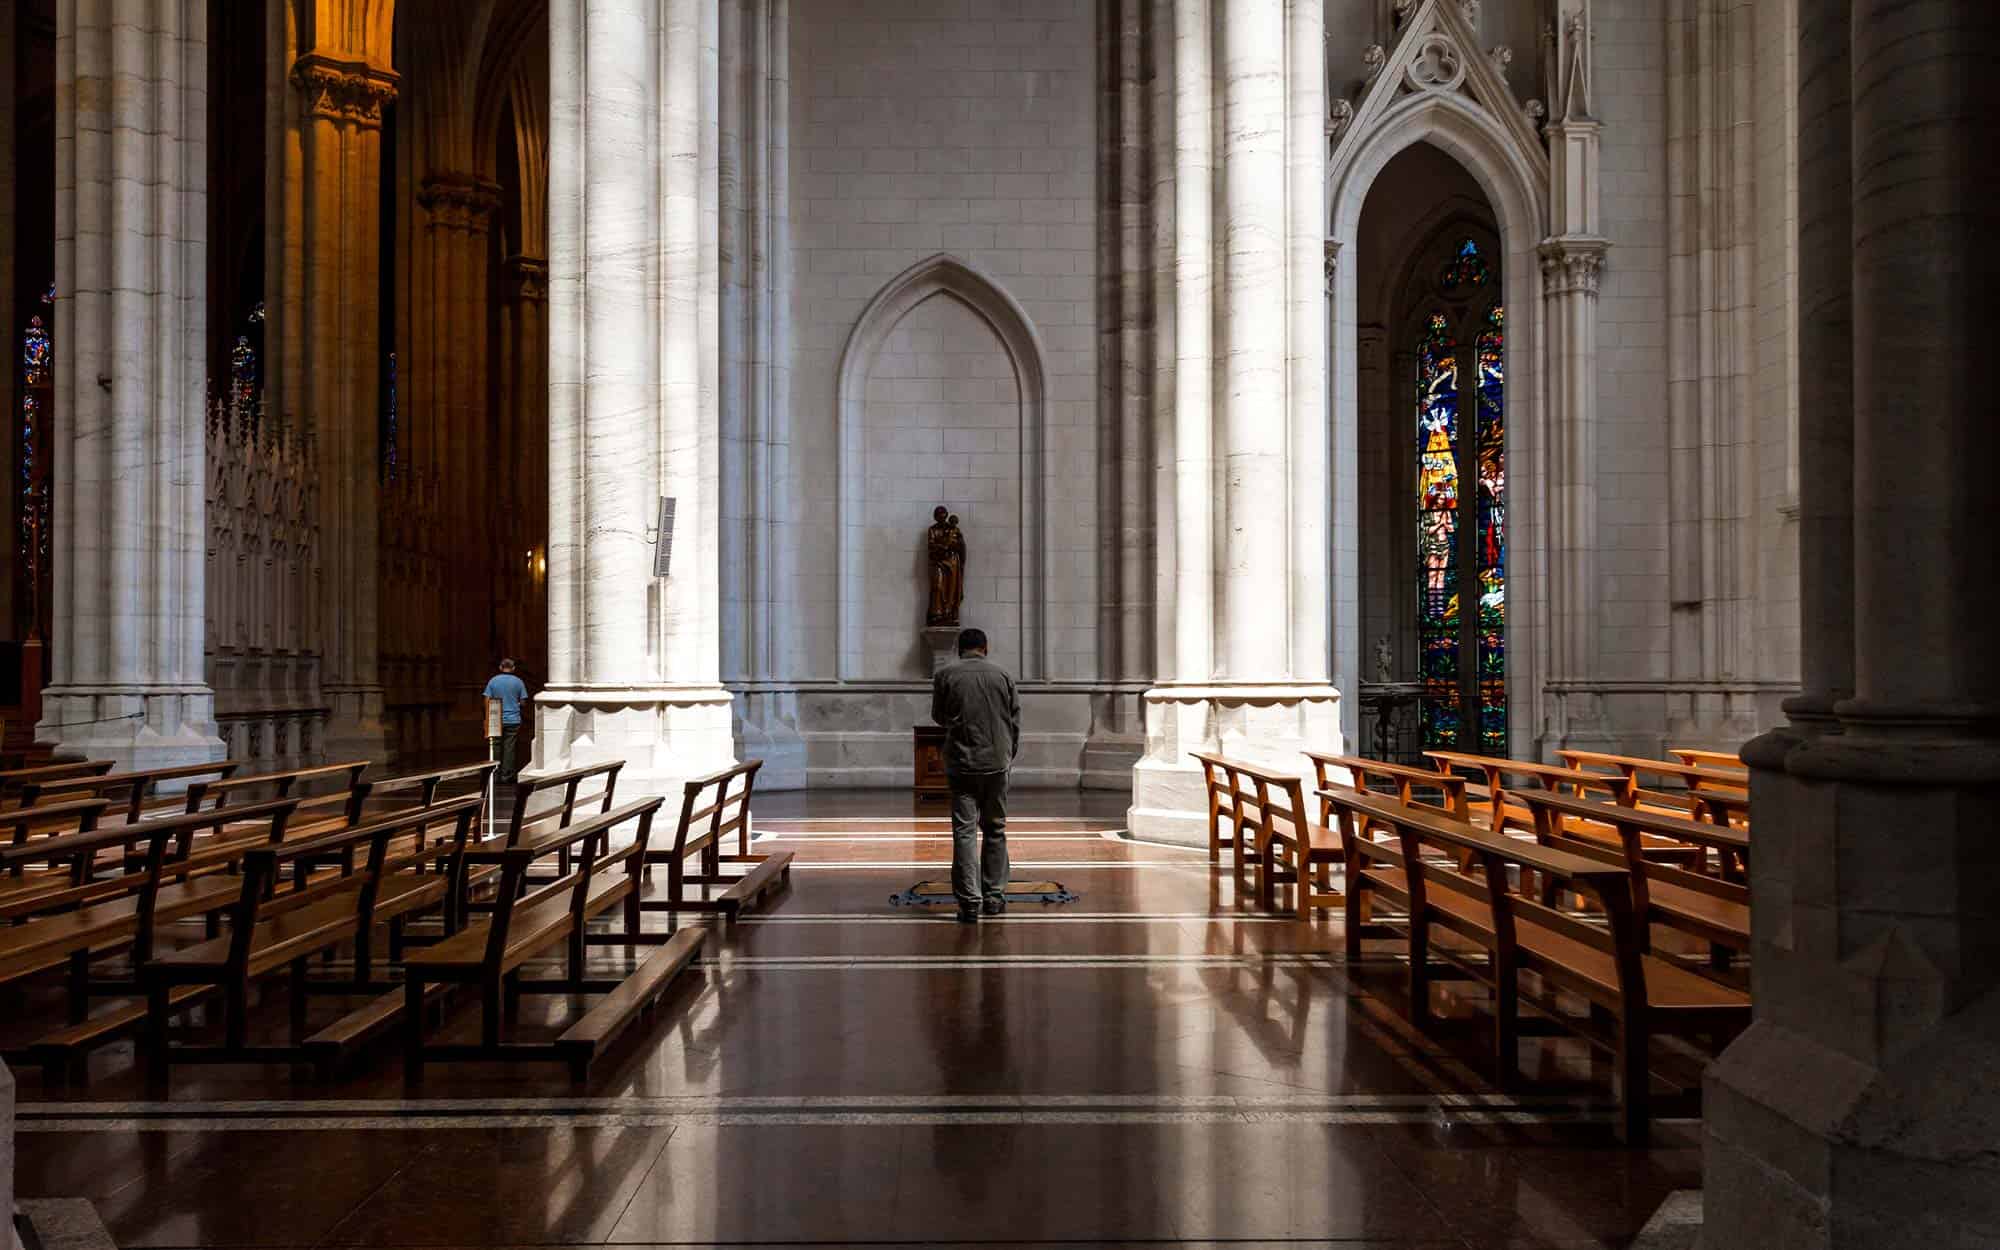 A worker mops the floor of a church